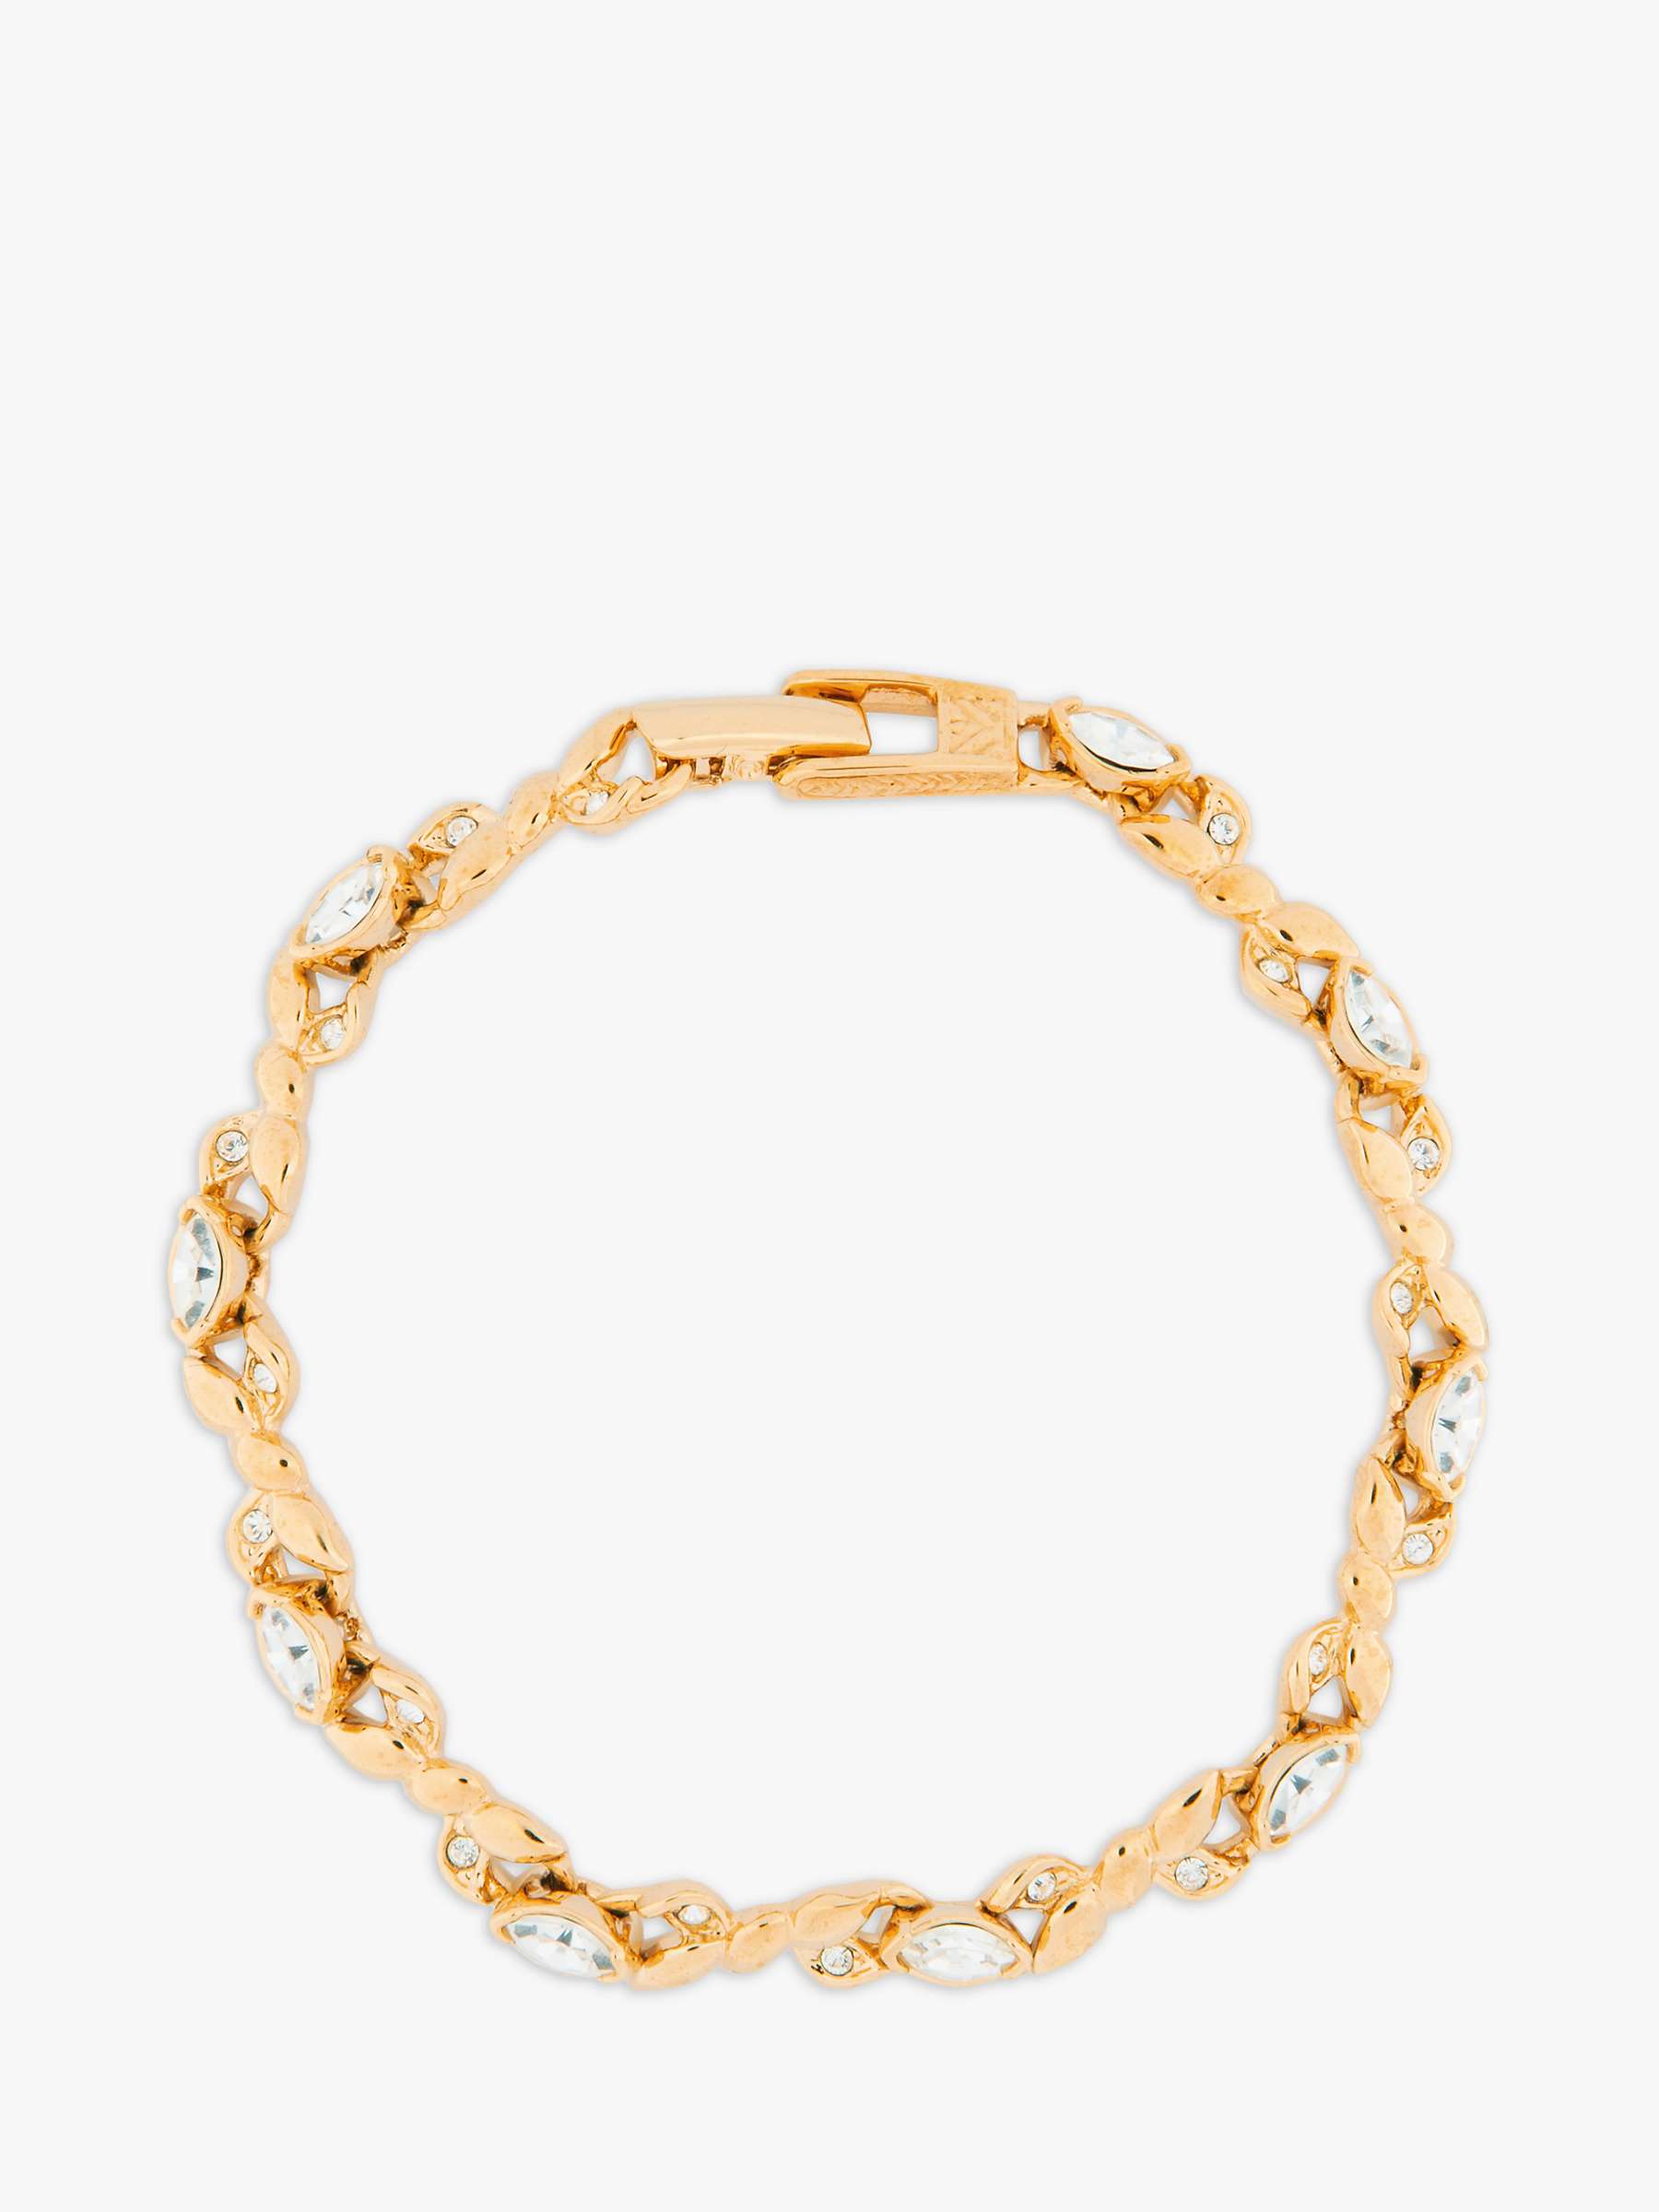 Buy Eclectica Vintage Attwood & Sawyer 22ct Gold Plated Swarovski Crystals Navette Bow Chain Bracelet, Gold Online at johnlewis.com